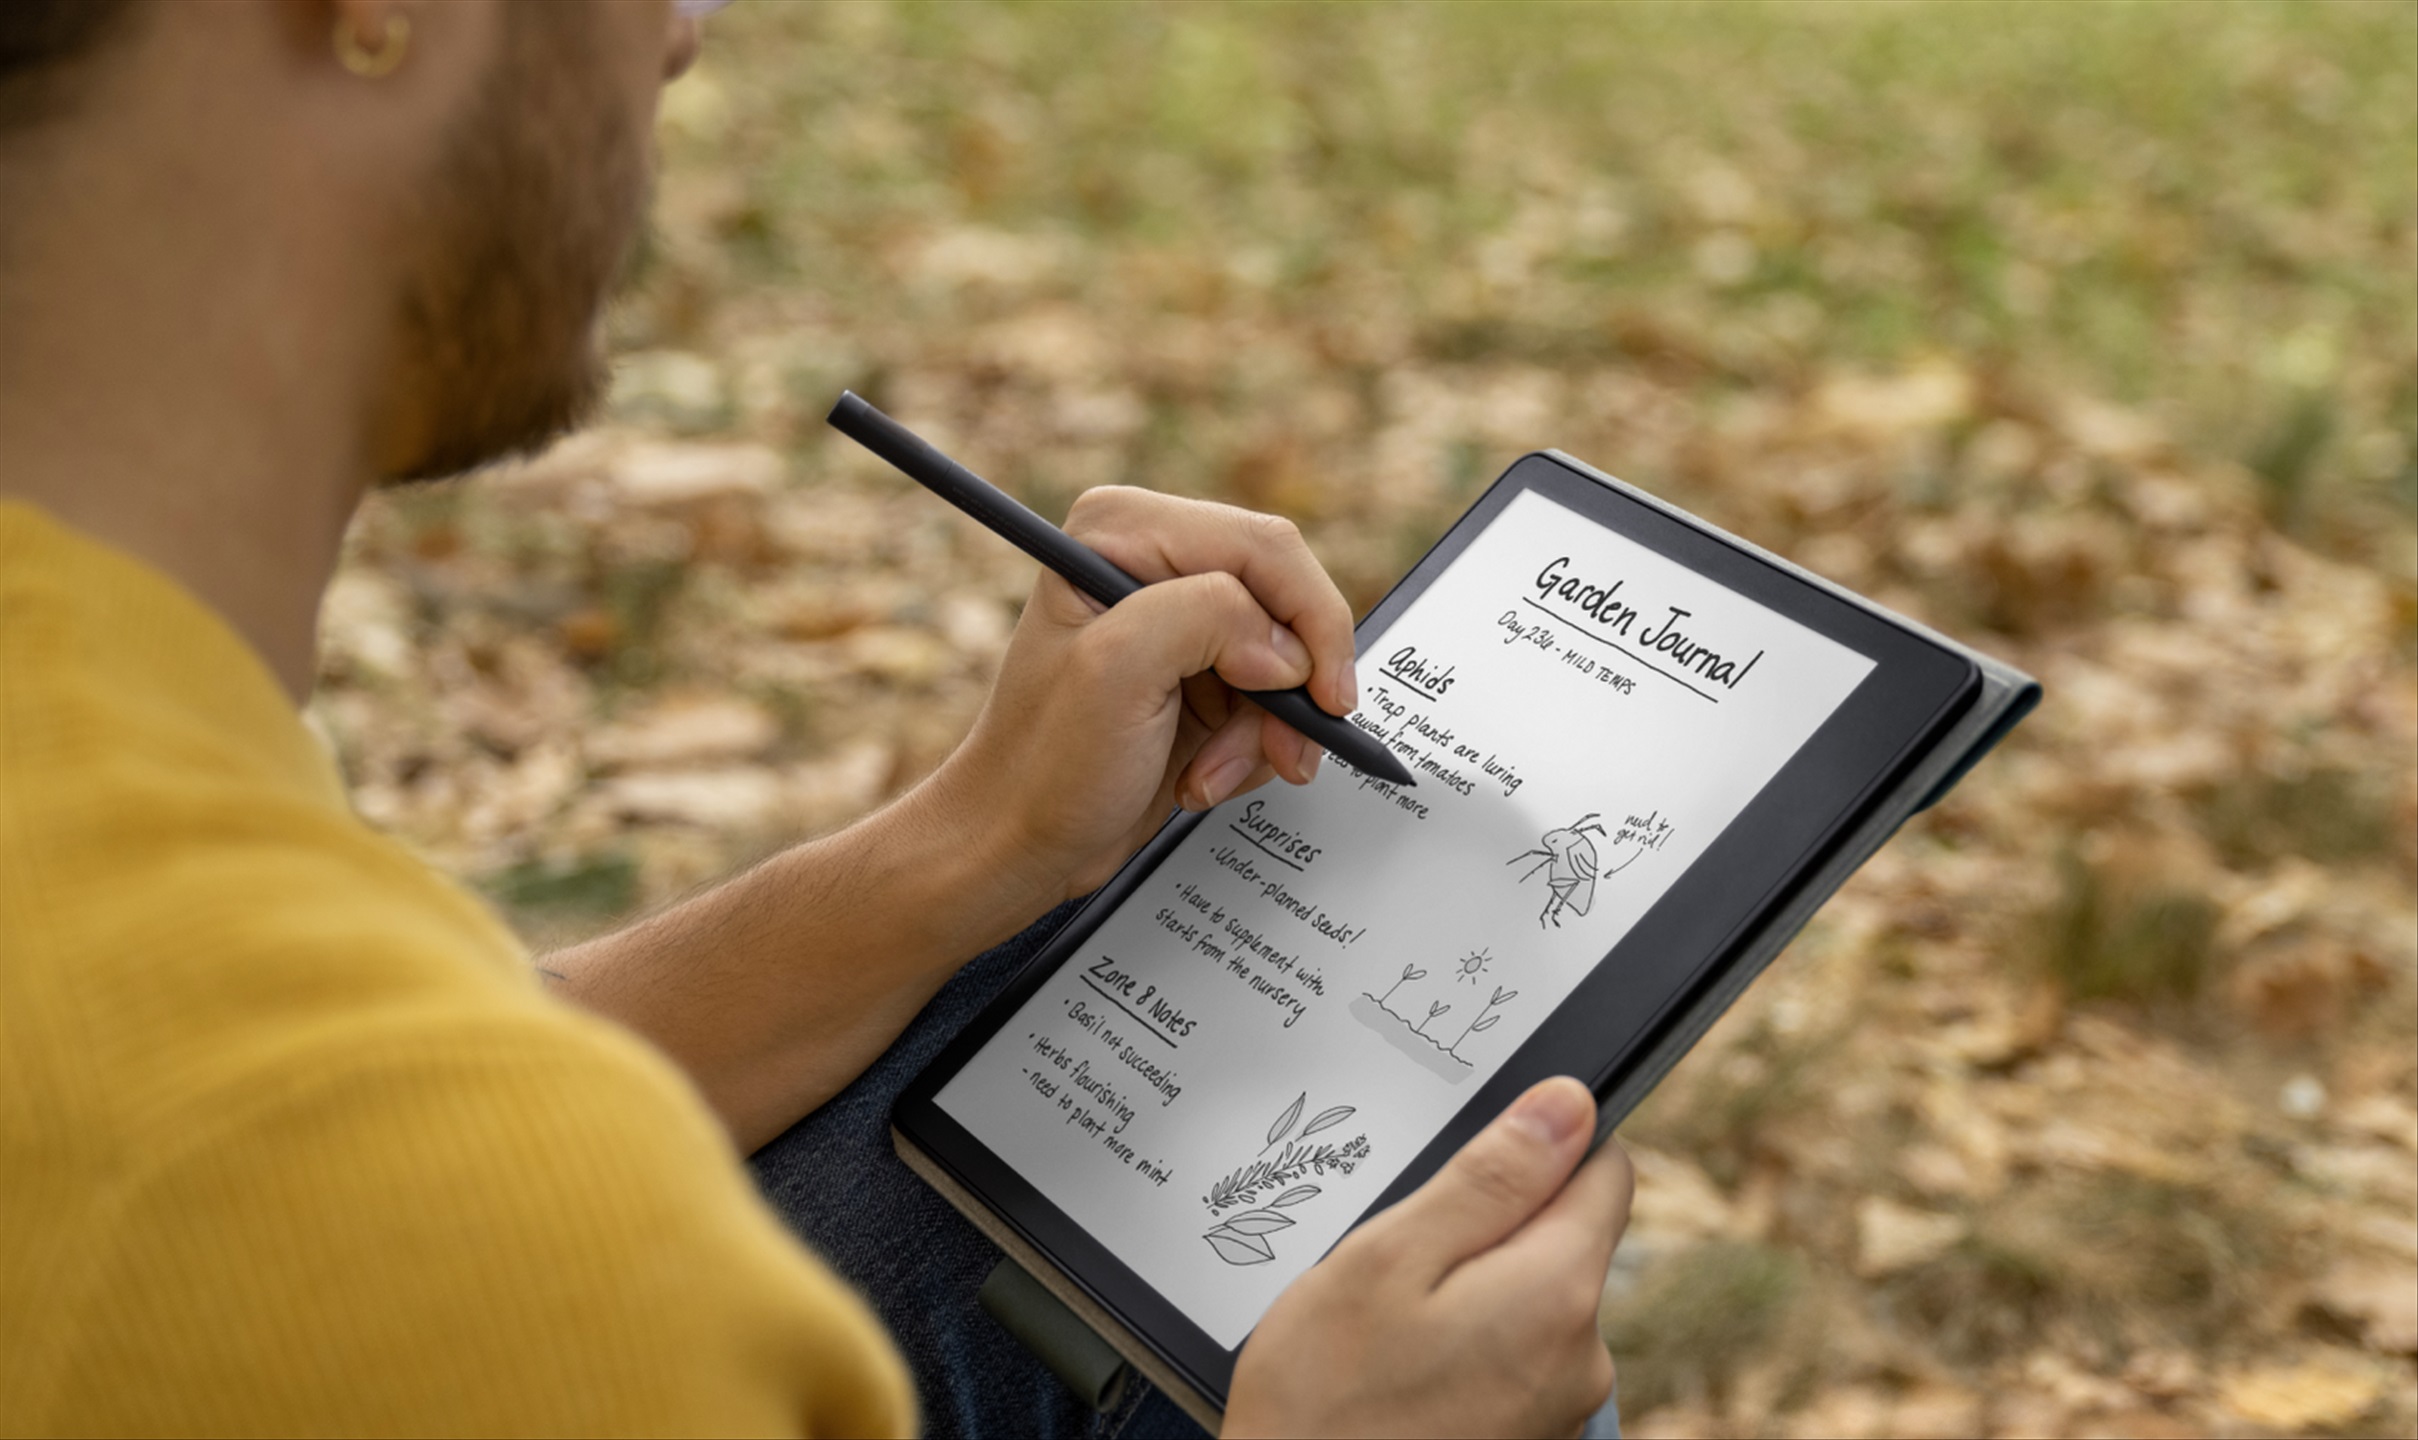 Amazon launches the best Amazon Kindle, among other new product updates before the end of the year